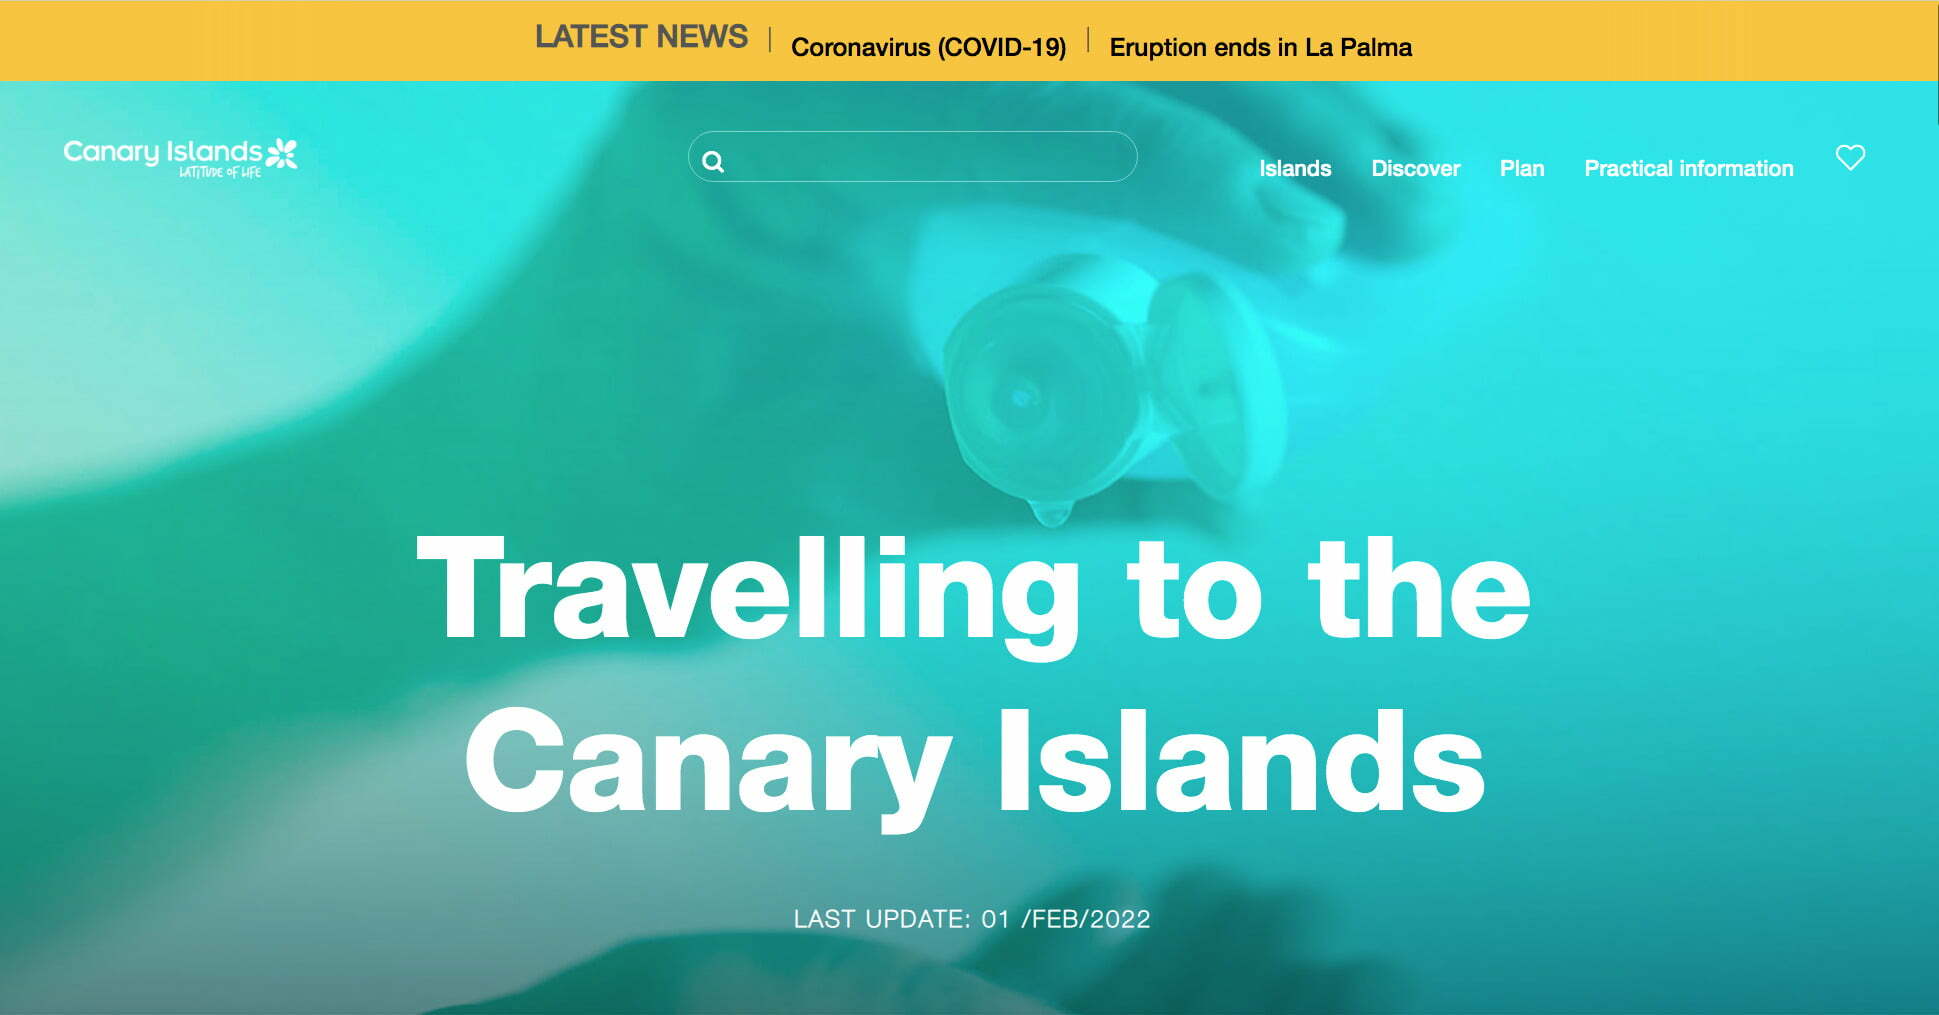 Current rules on travelling to The Canary Islands, entry to Spain restricted for unvaccinated travellers